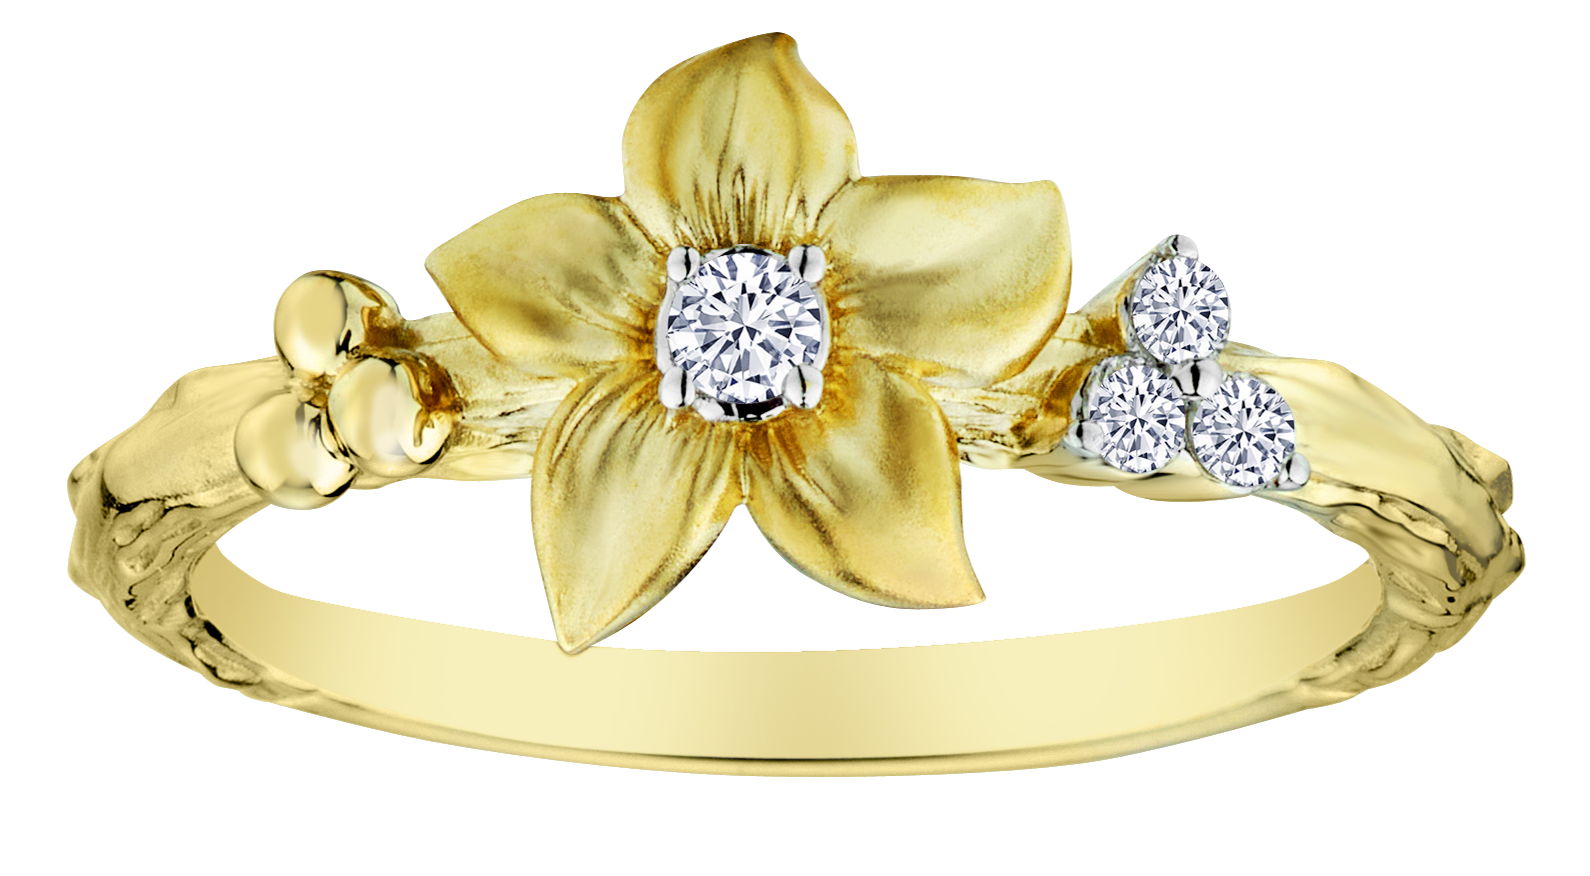 .10 Carat of Diamonds "Flower" Ring, 10kt Yellow Gold.....................NOW